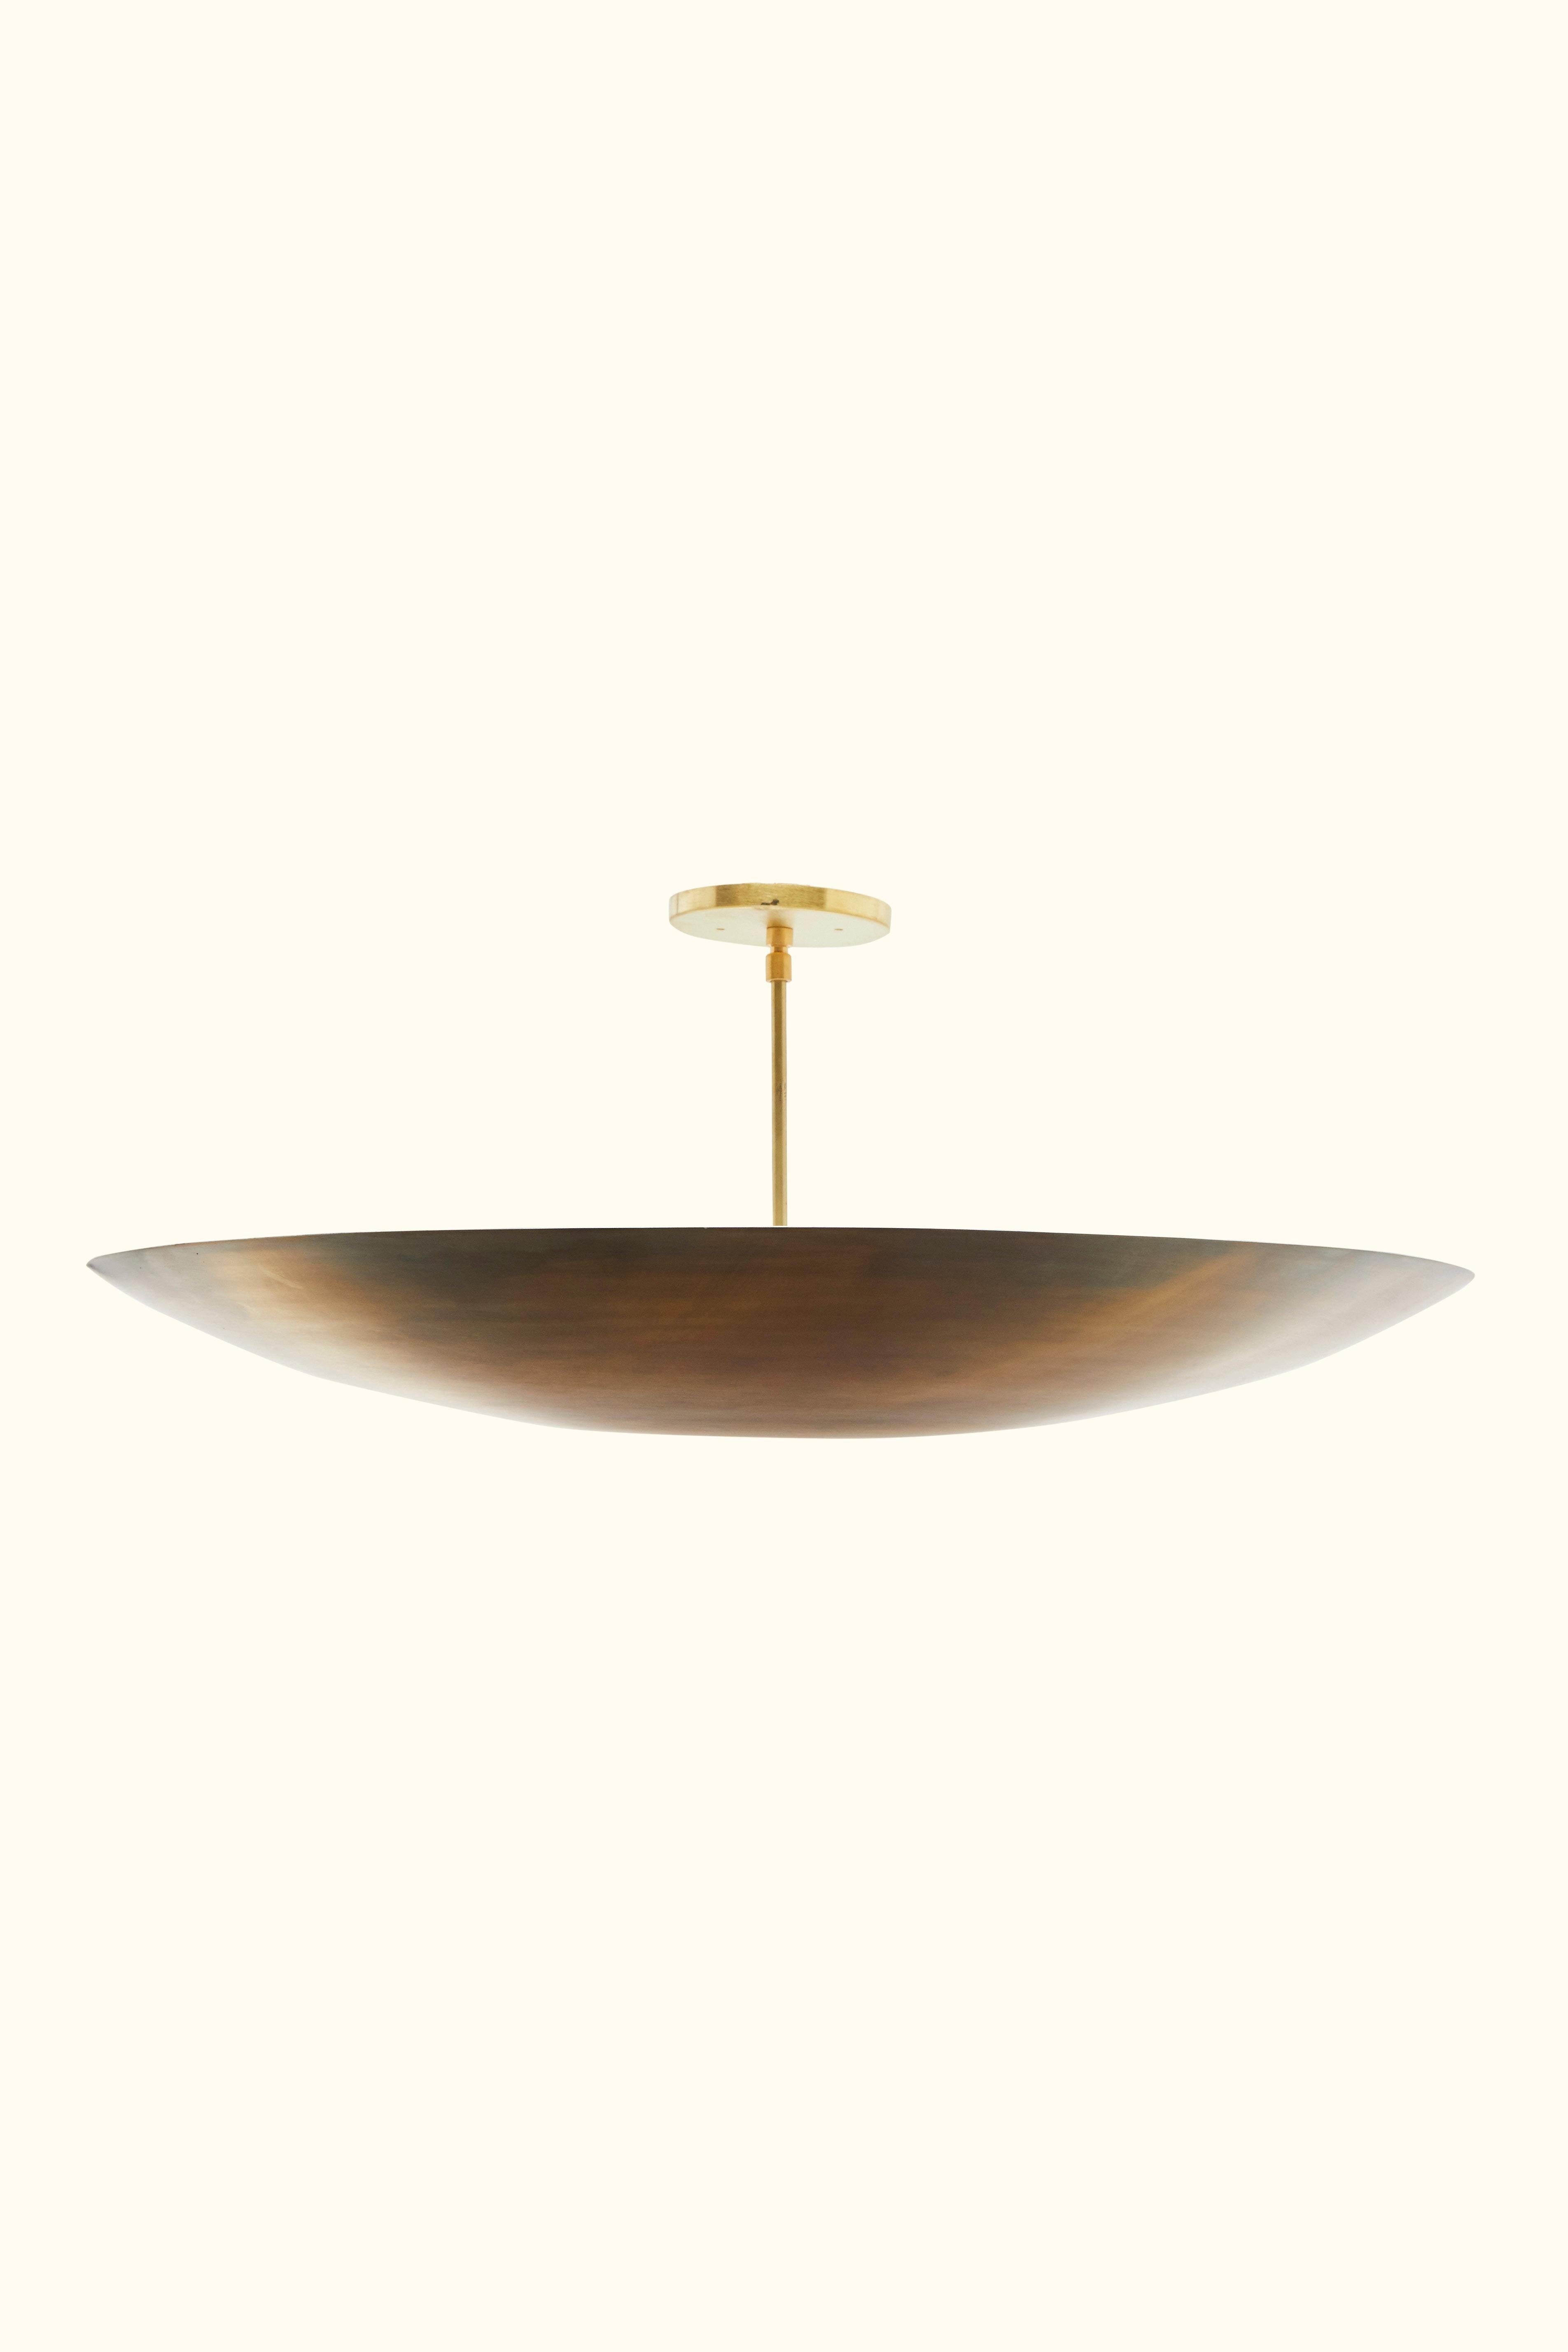 The Alta brass dome chandelier features a spun metal shade with a brass canopy and rod. The shade is available in brass or powdercoated metal finishes. Shown here in Antiqued Brass. 

The Lawson-Fenning Collection is designed and handmade in Los